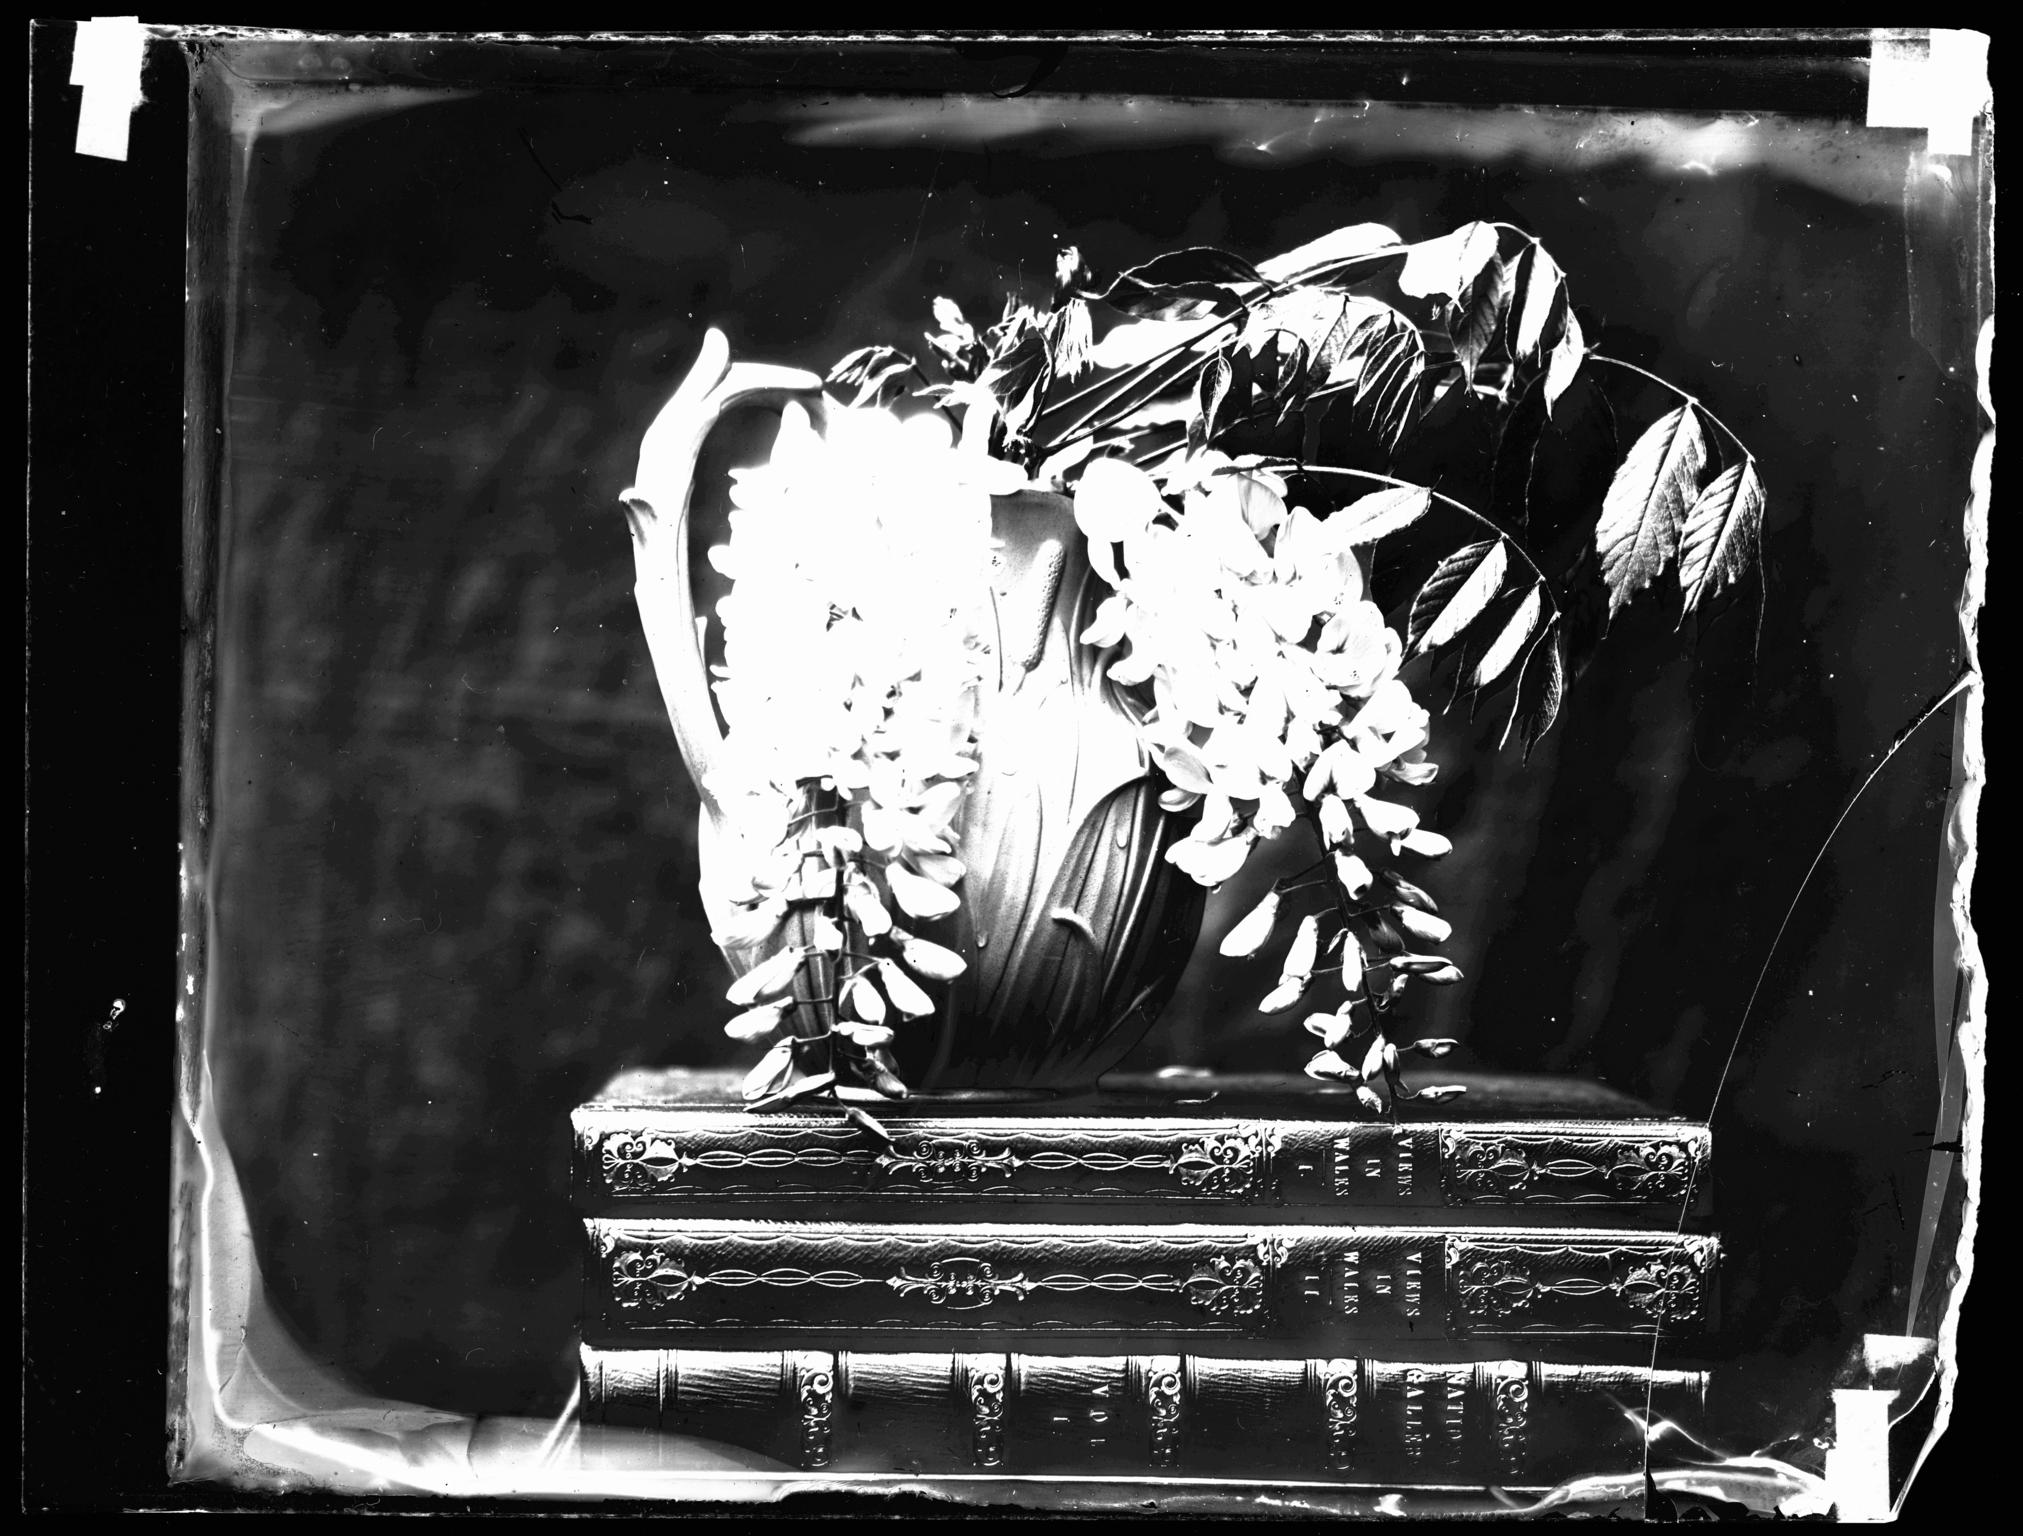 Flowers on a table, glass negative